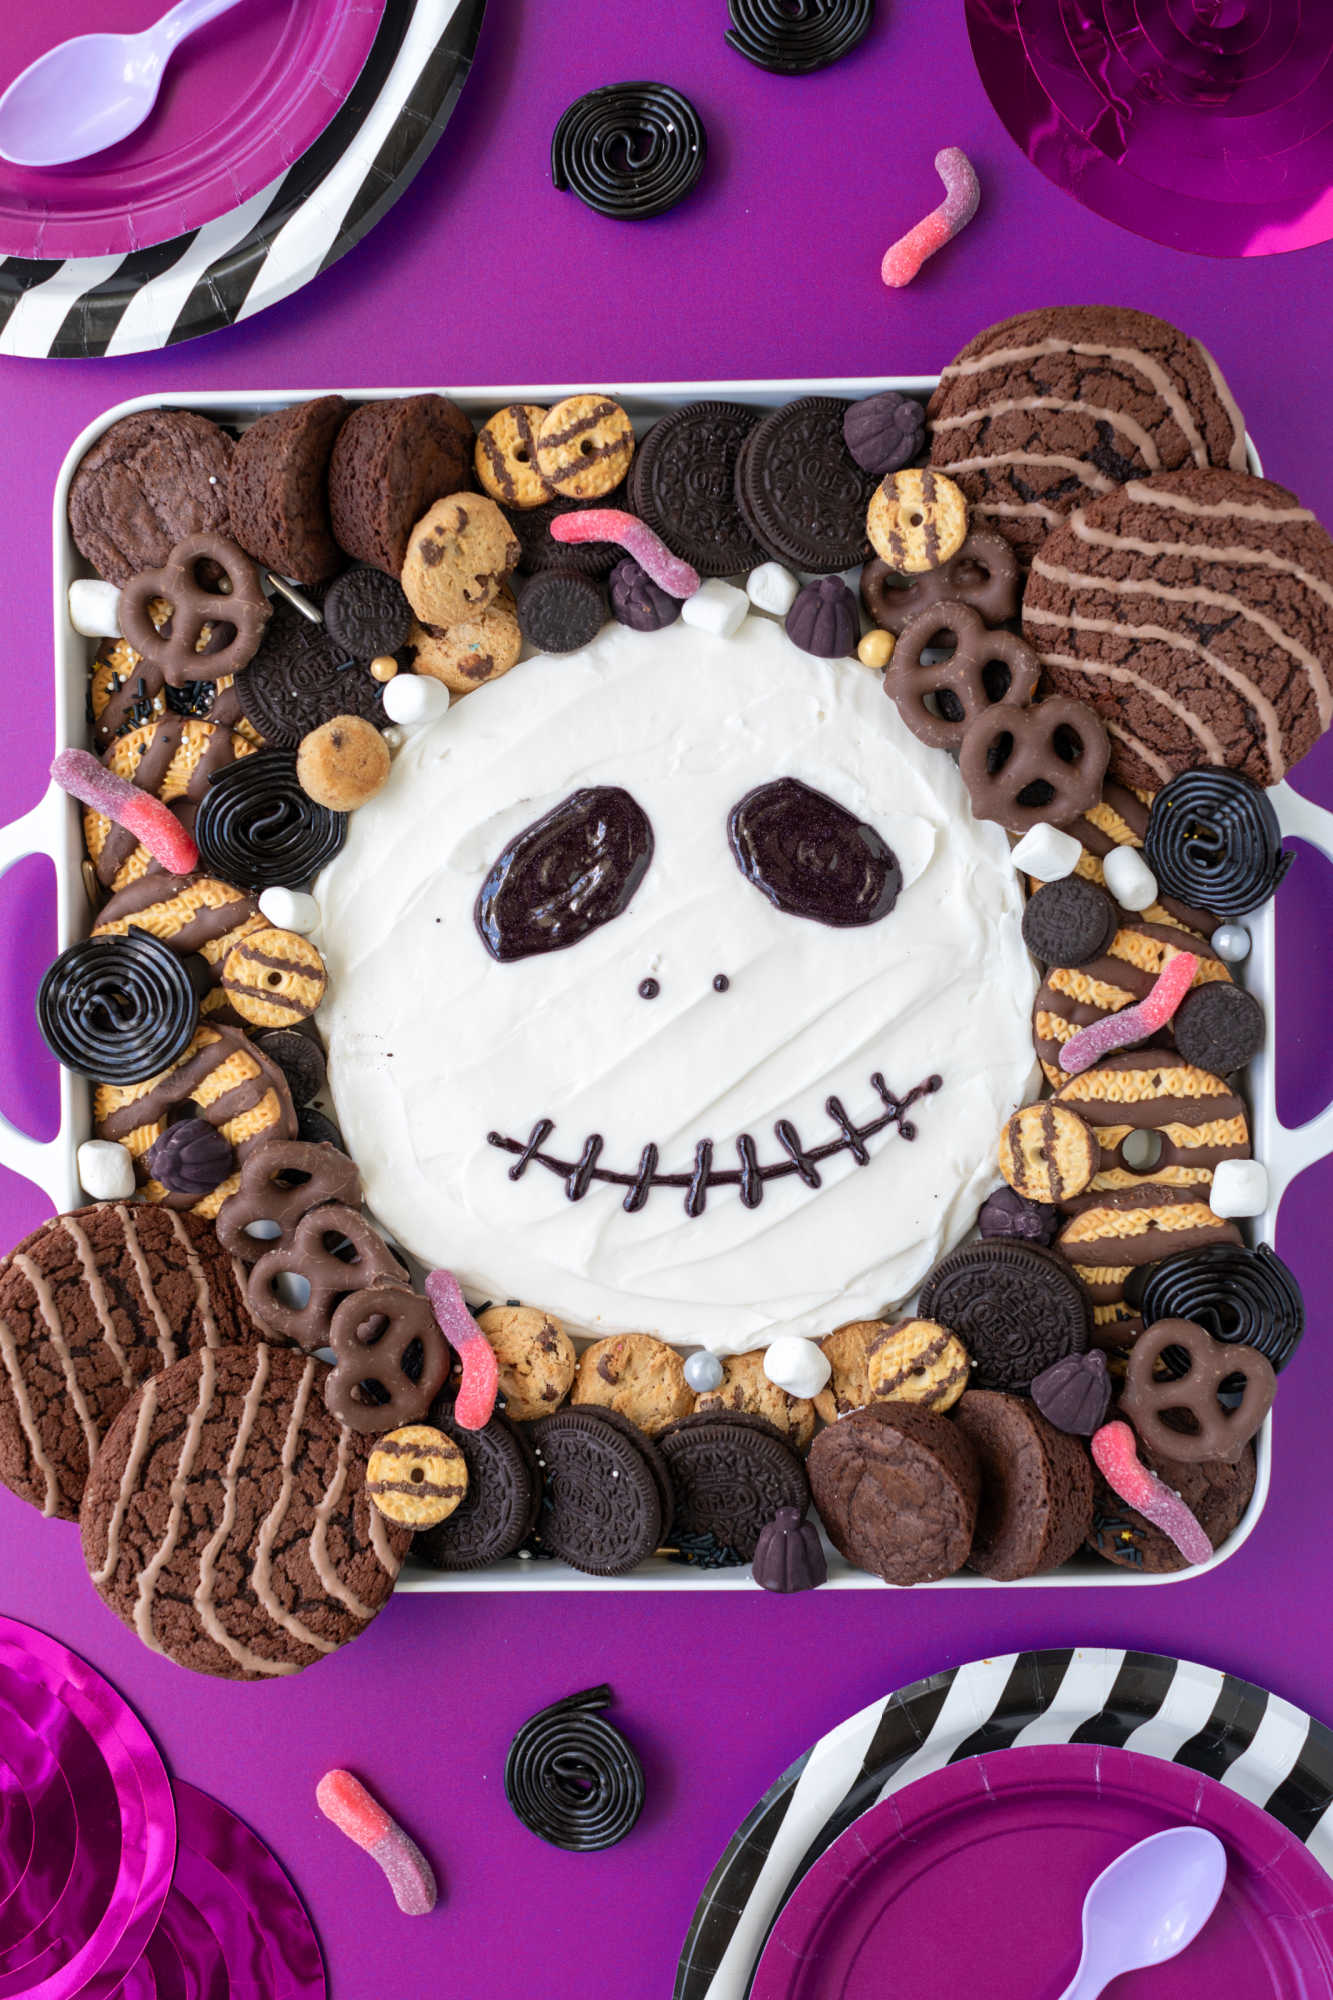 Finished Jack Skellington frosting board near party supplies